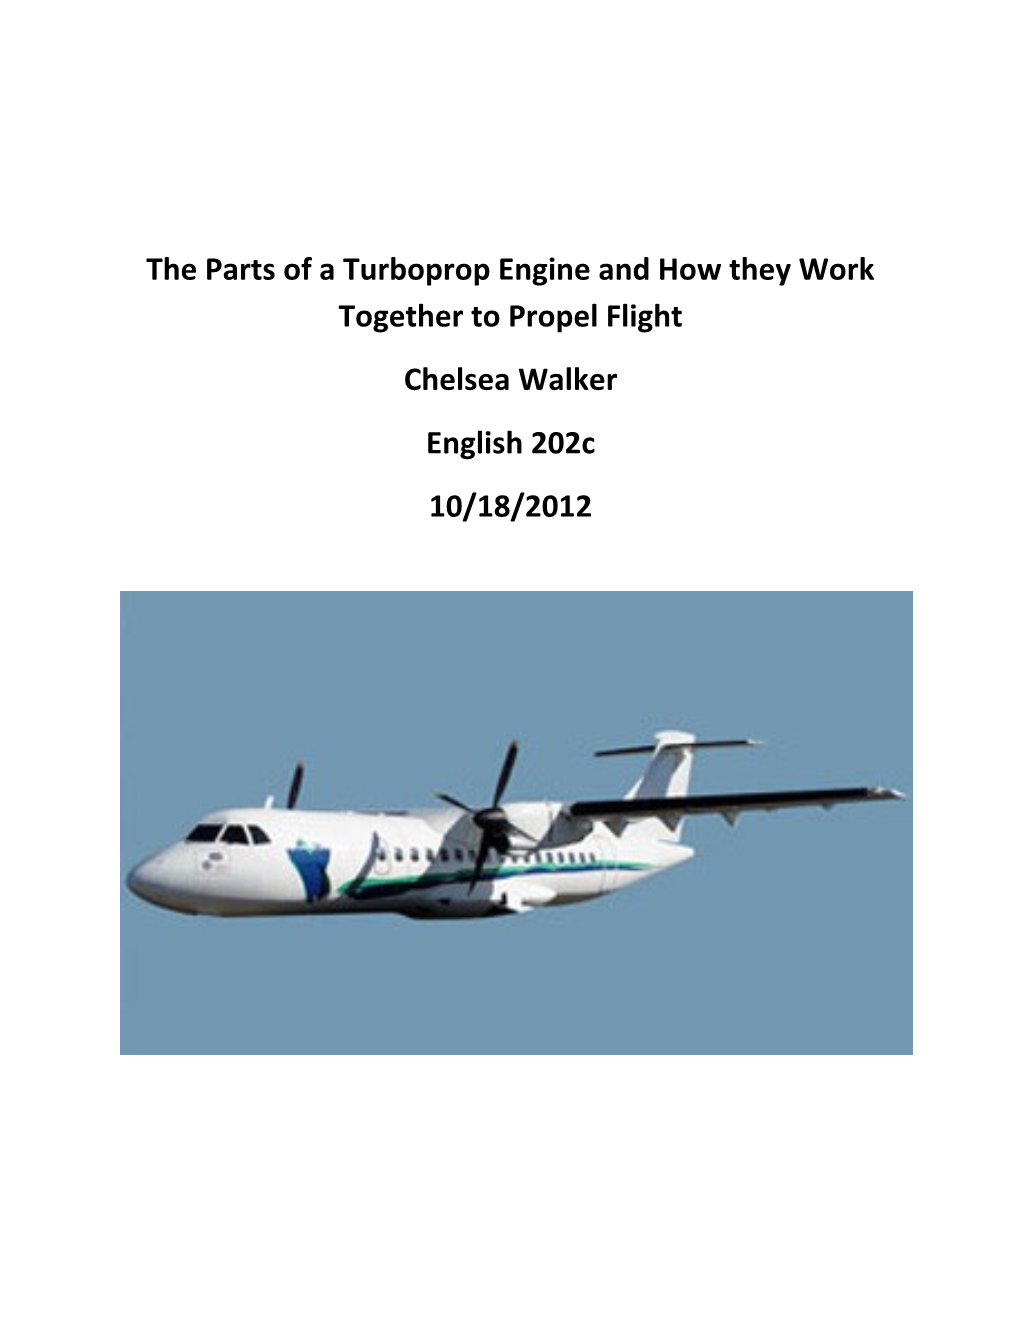 The Parts of a Turboprop Engine and How They Work Together to Propel Flight